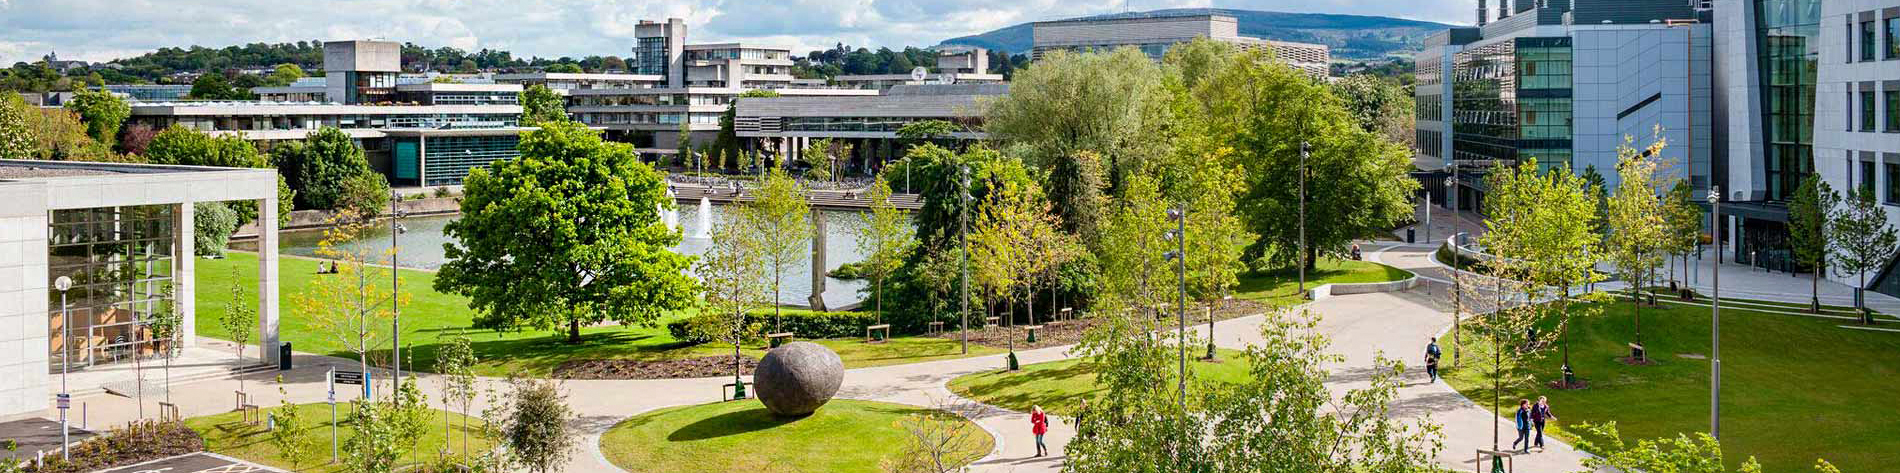 Are you New to UCD? Start Here